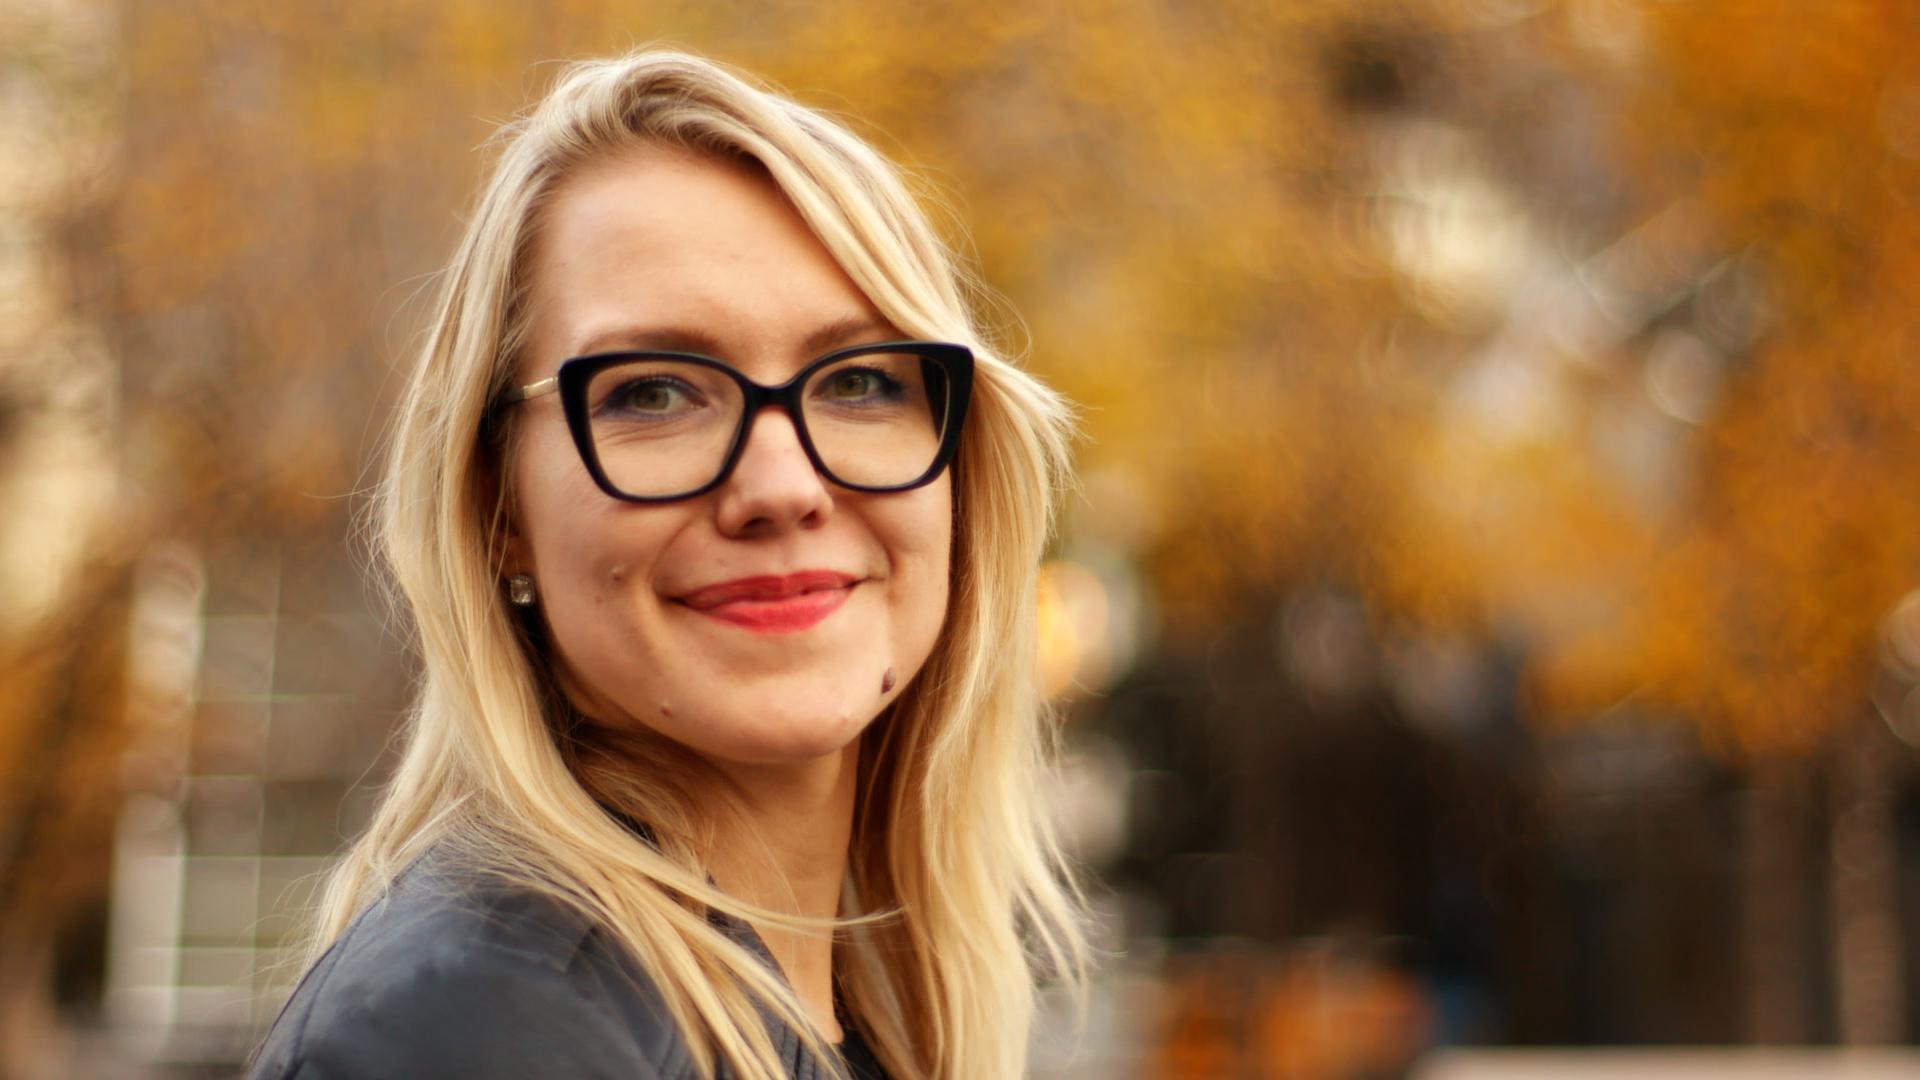  A blonde woman with glasses smiles at the camera